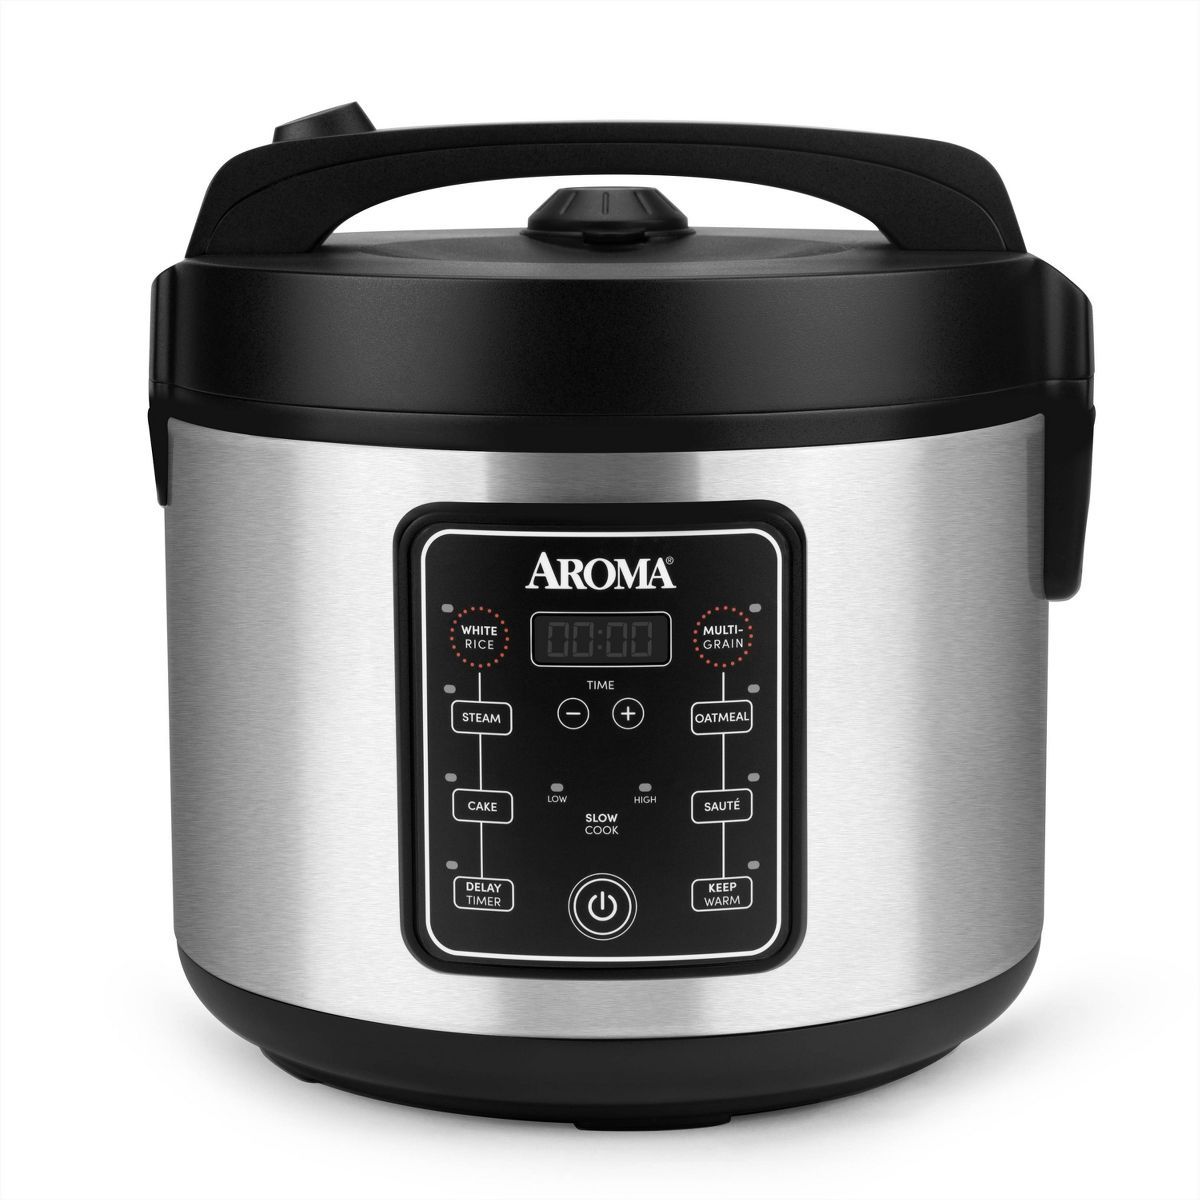 Aroma 20 Cup Digital Multicooker & Rice Cooker - Stainless Steel | Target